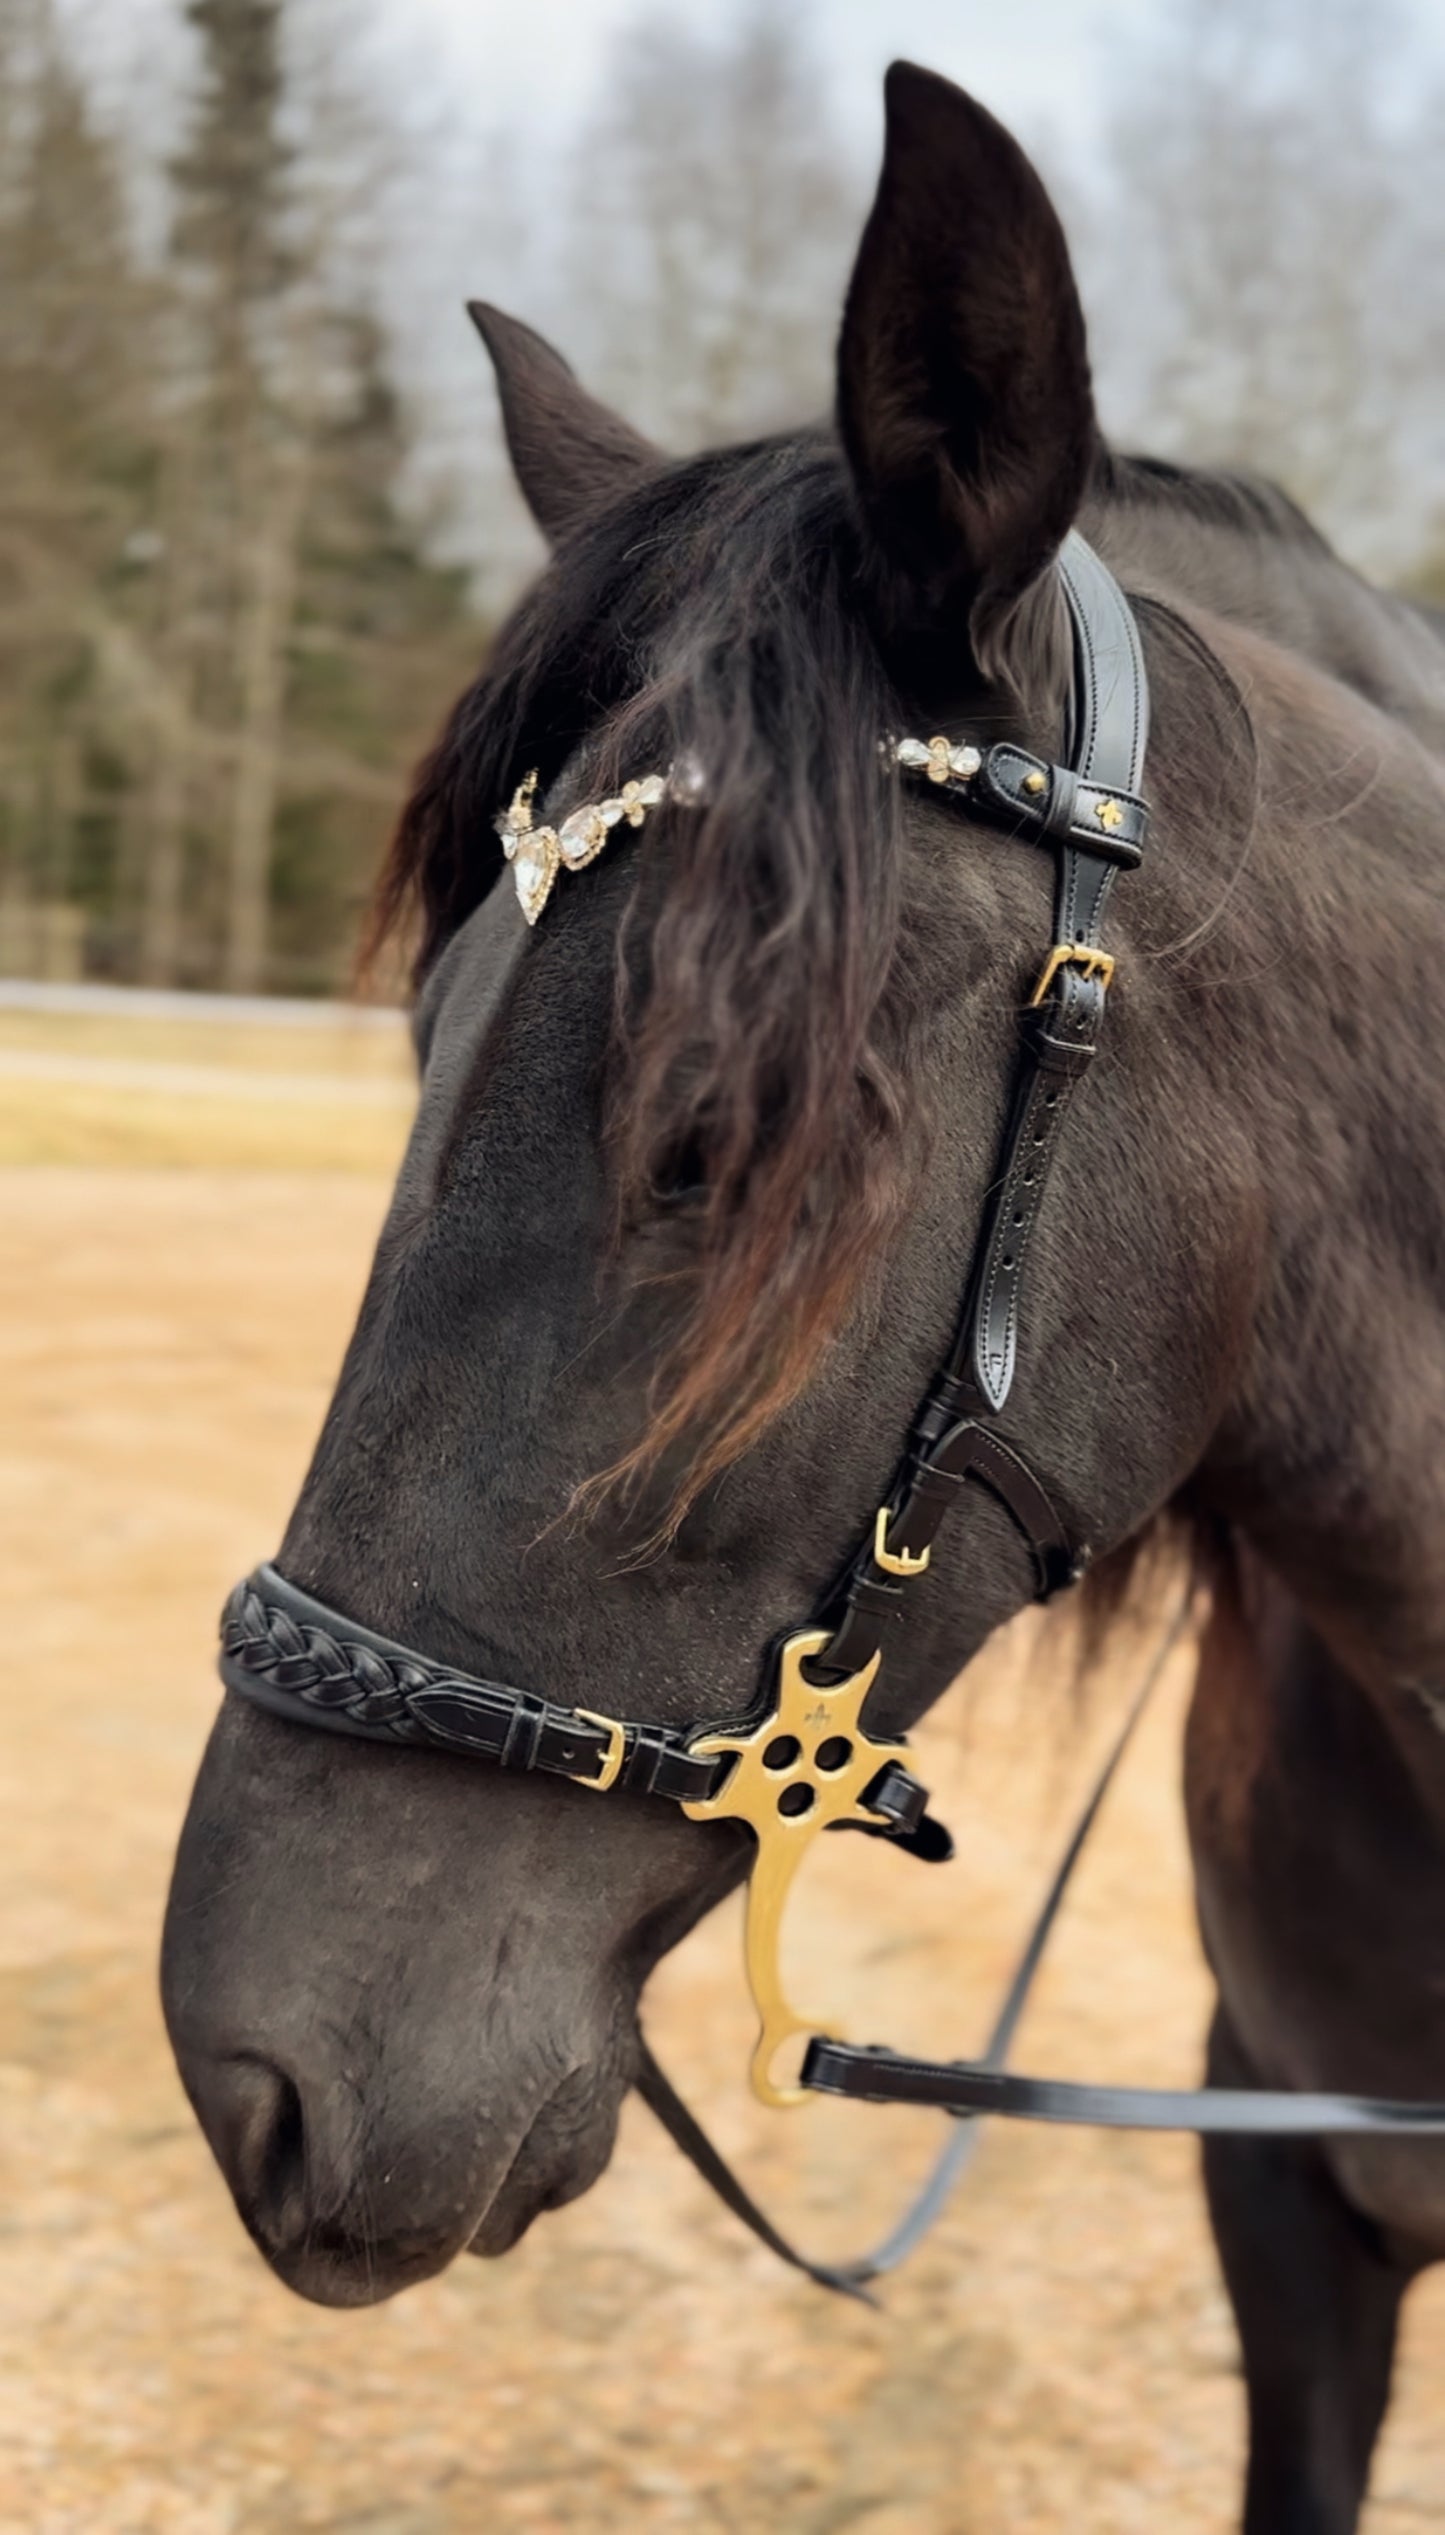 Stardust browband